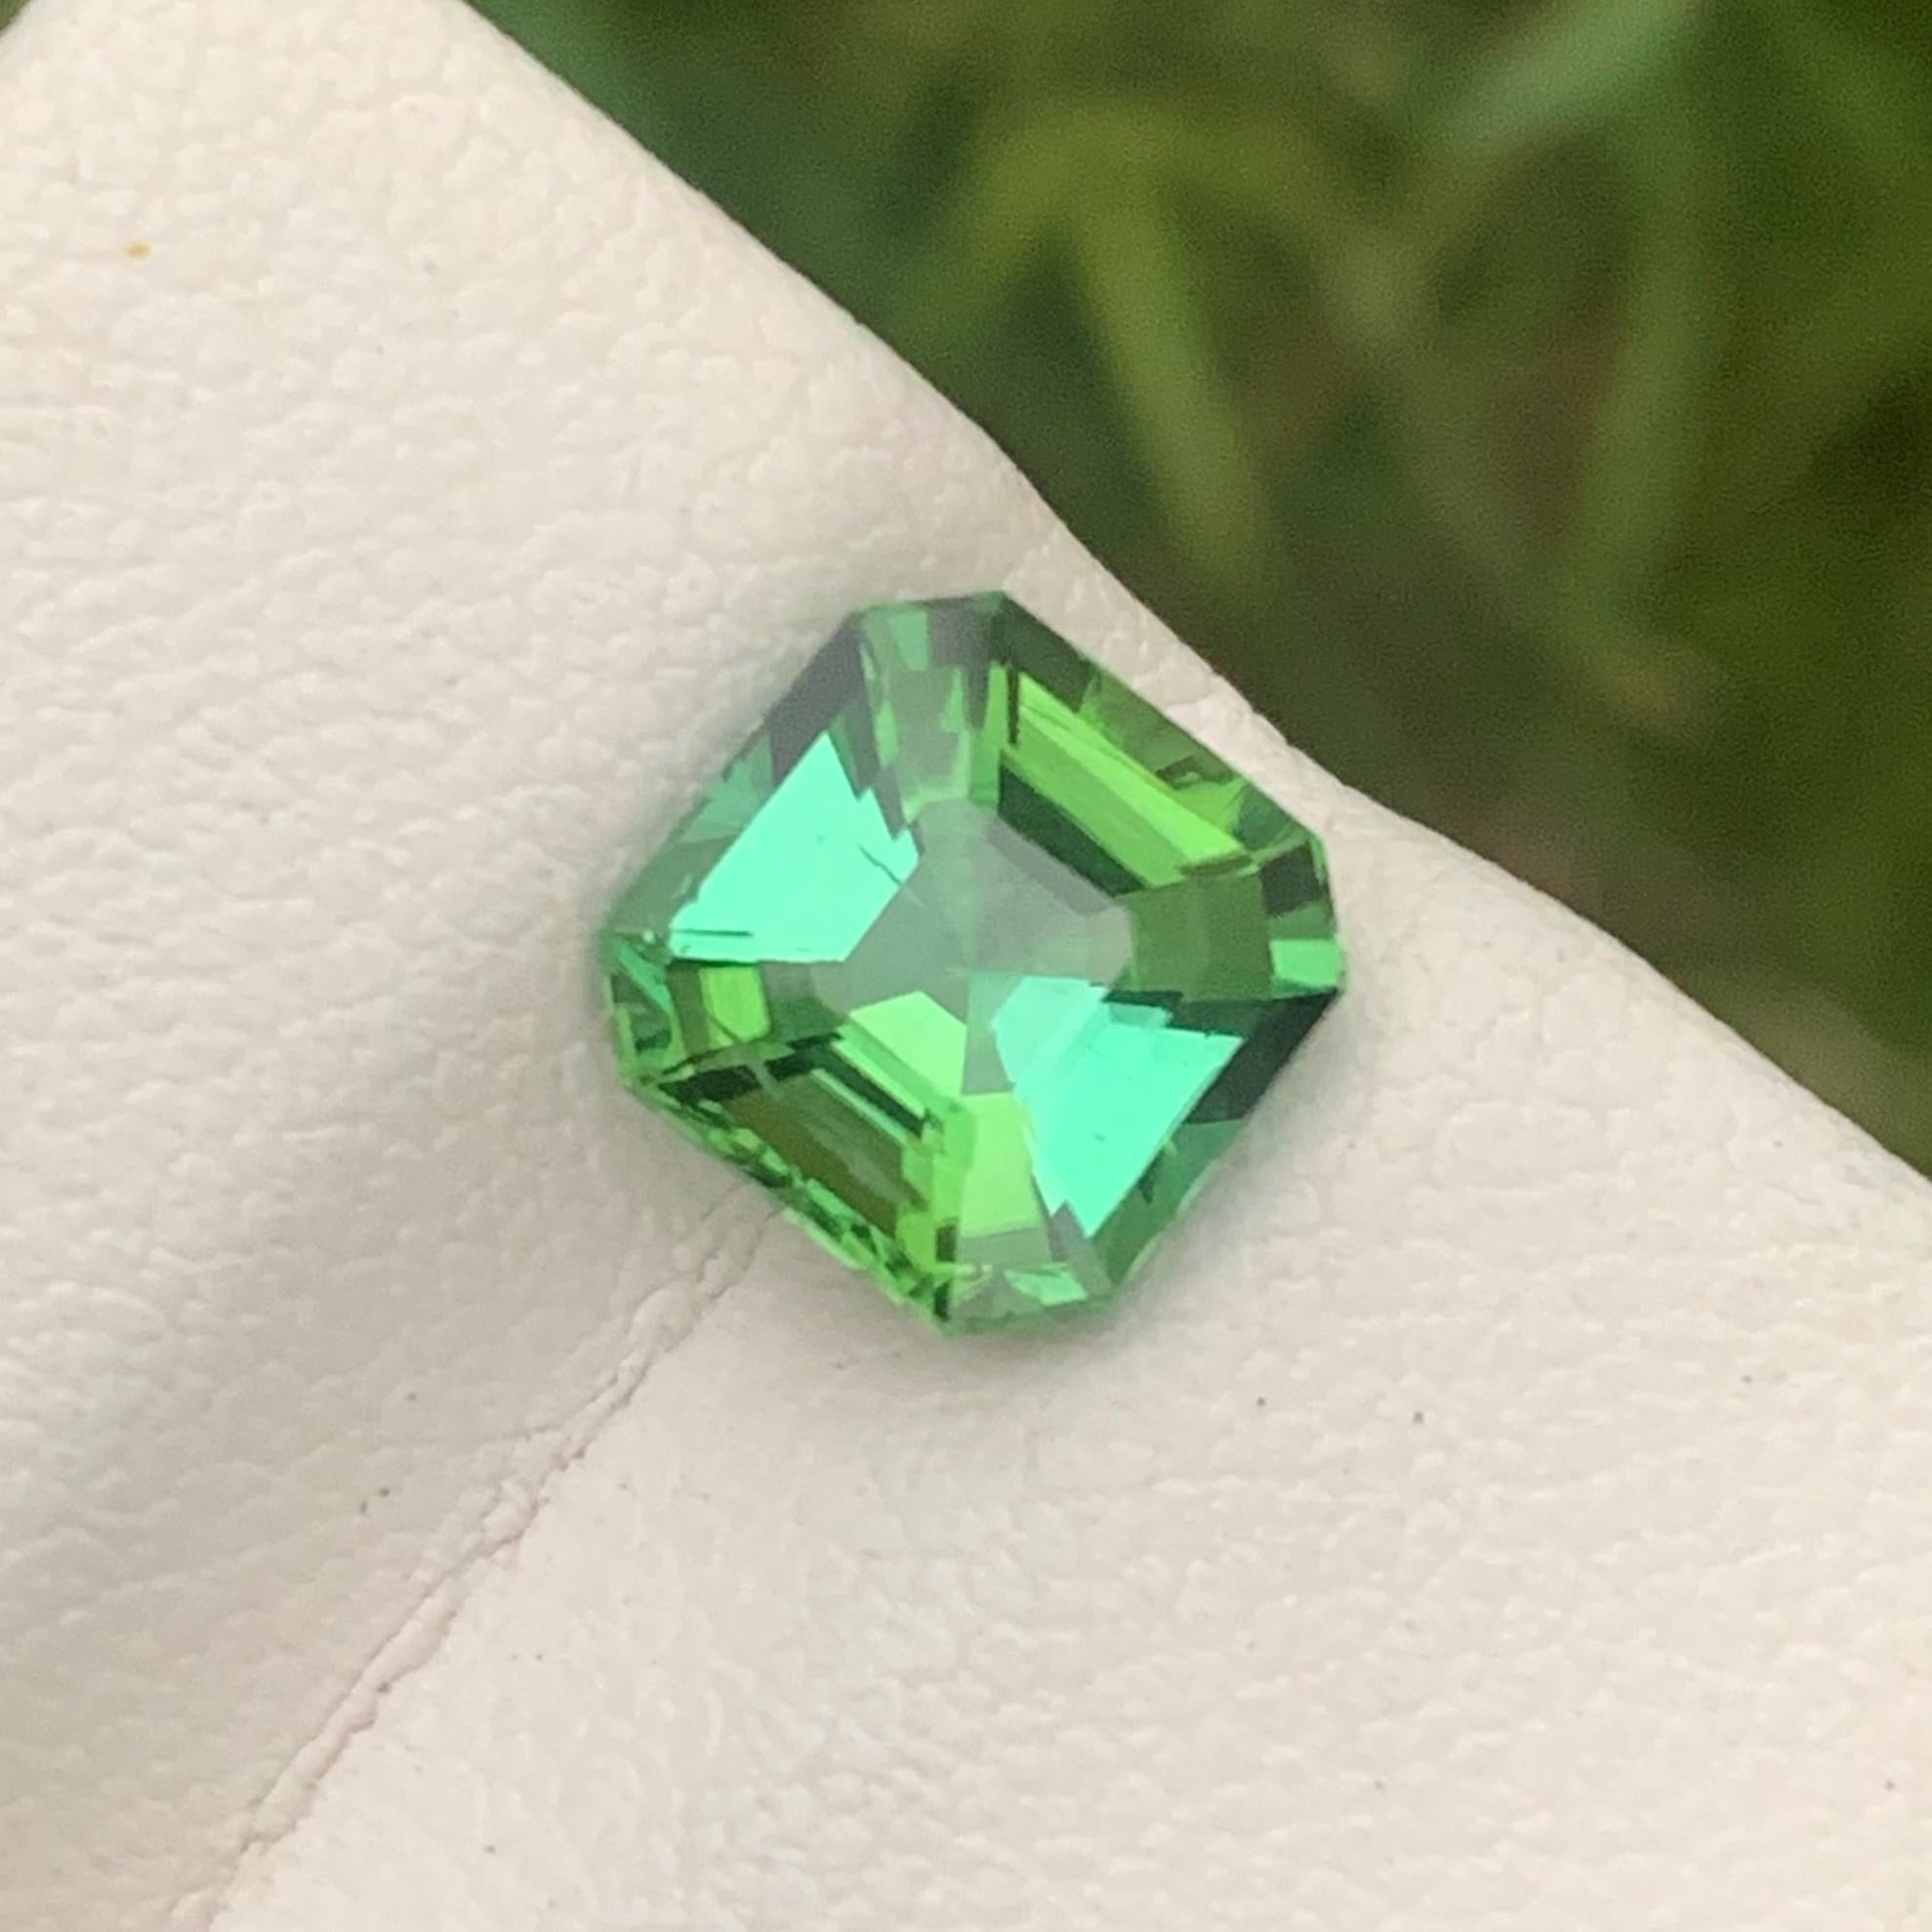 Gemstone Type : Tourmaline
Weight : 2.15 Carats
Dimensions : 7.8x7.7x5.2 Mm
Origin : Kunar Afghanistan
Clarity : Eye Clean
Shape: Asscher 
Color: Mintgreen
Certificate: On Demand
Basically, mint tourmalines are tourmalines with pastel hues of light